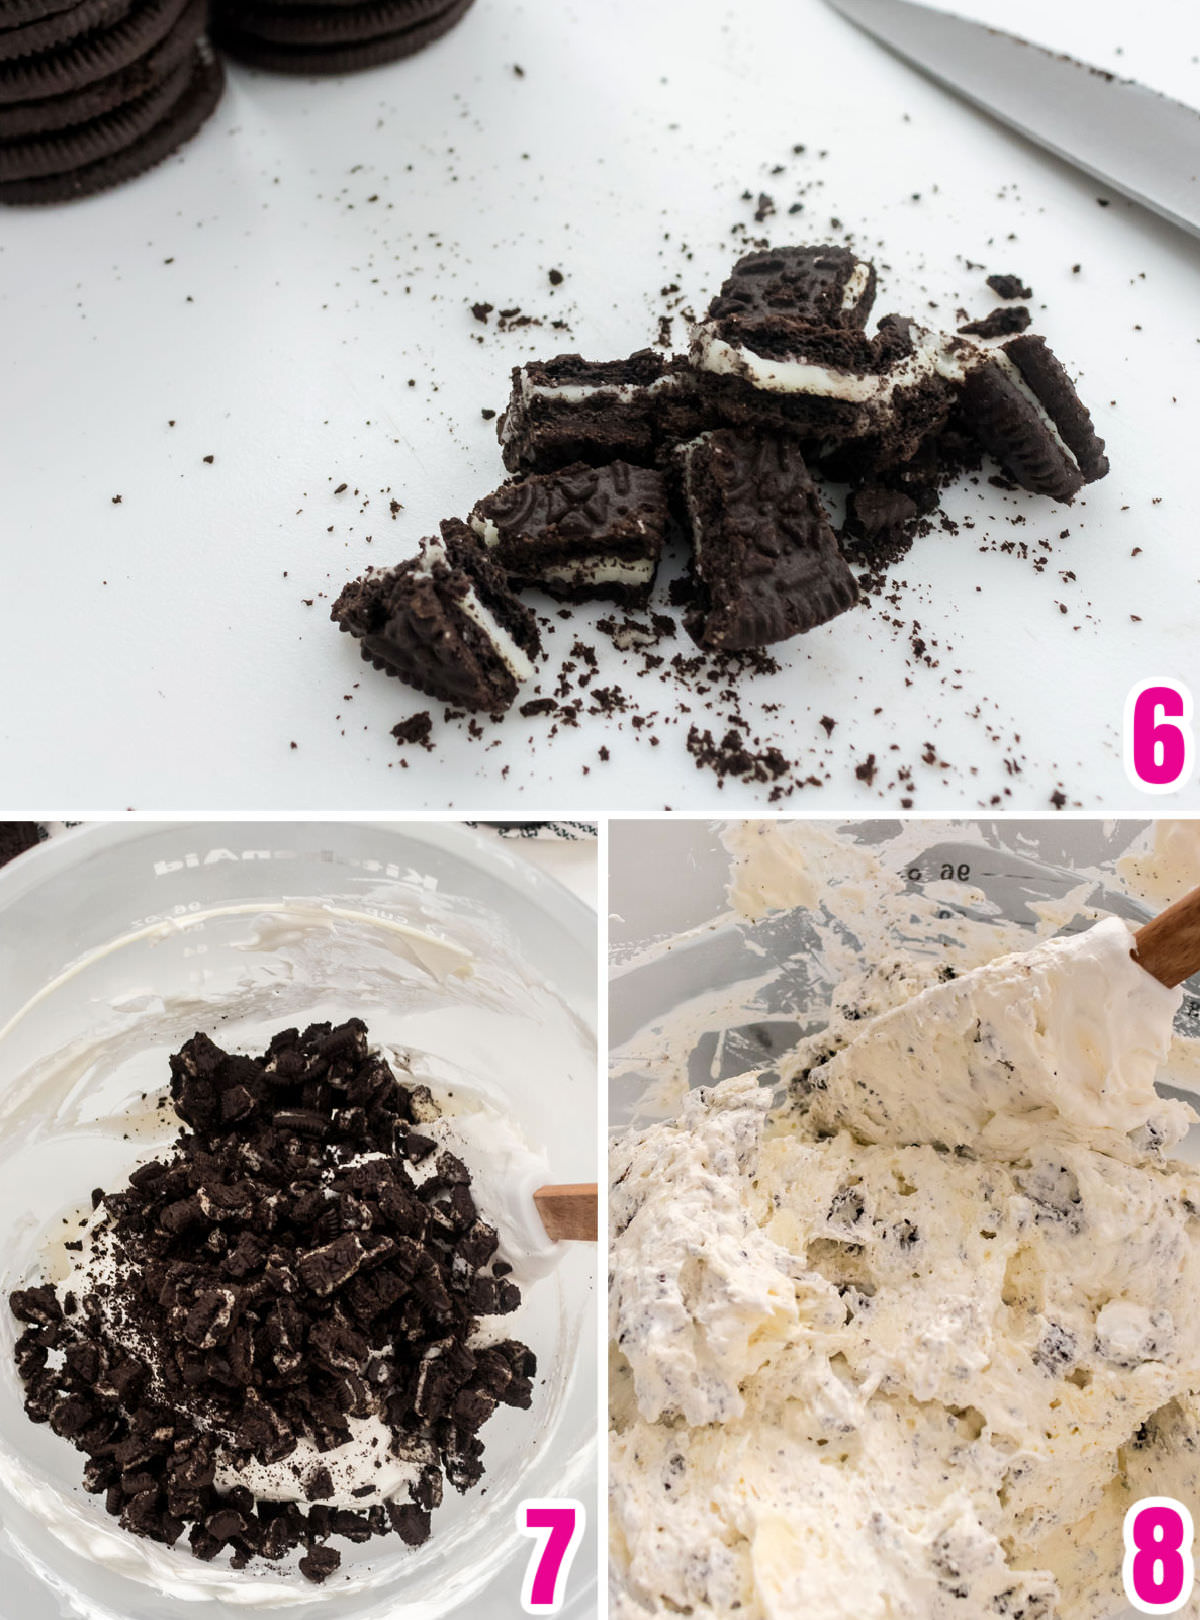 Collage image showing the steps for adding the Oreo cookie pieces to the cream pie filling.